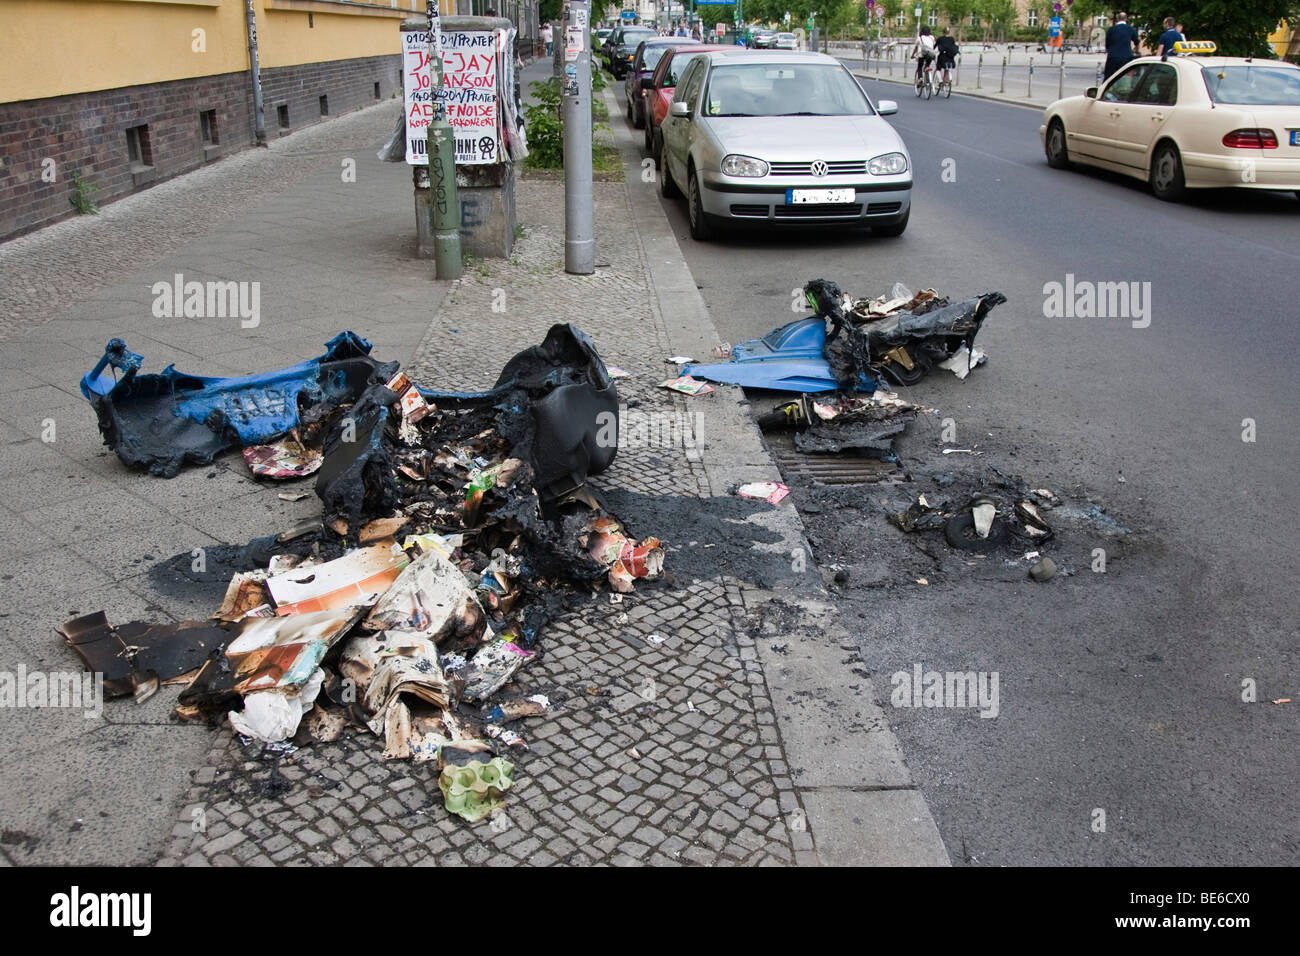 Rubbish container burnt at 1st of May demonstrations, Berlin, Germany, Europe Stock Photo